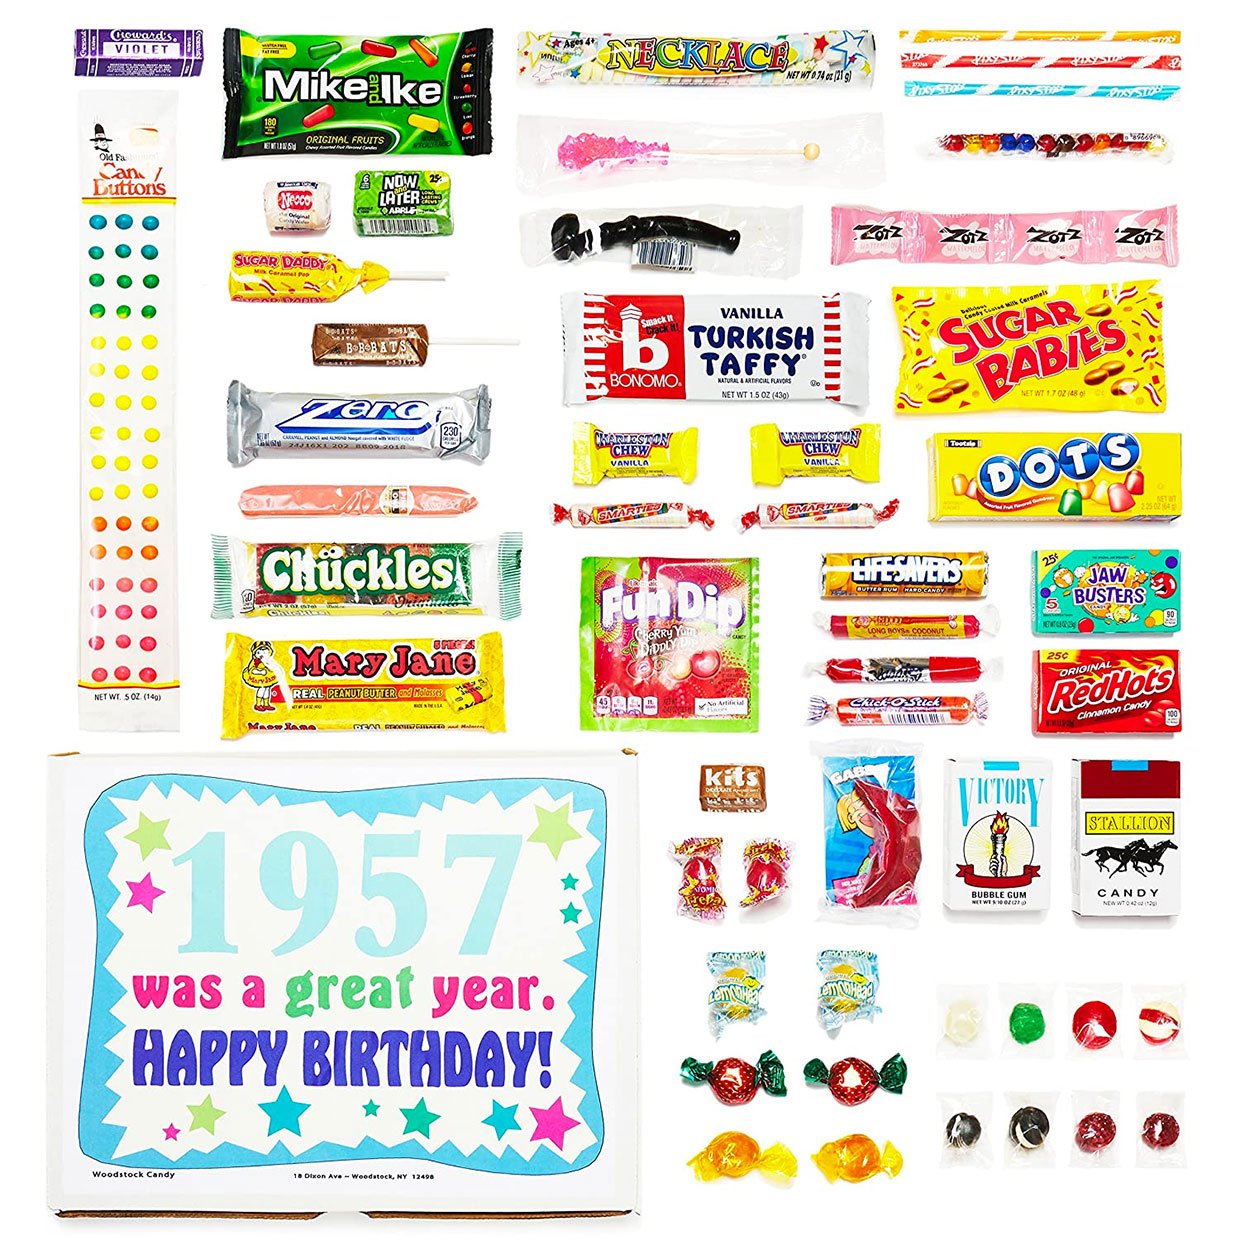 Candy Birthday Gift Boxes